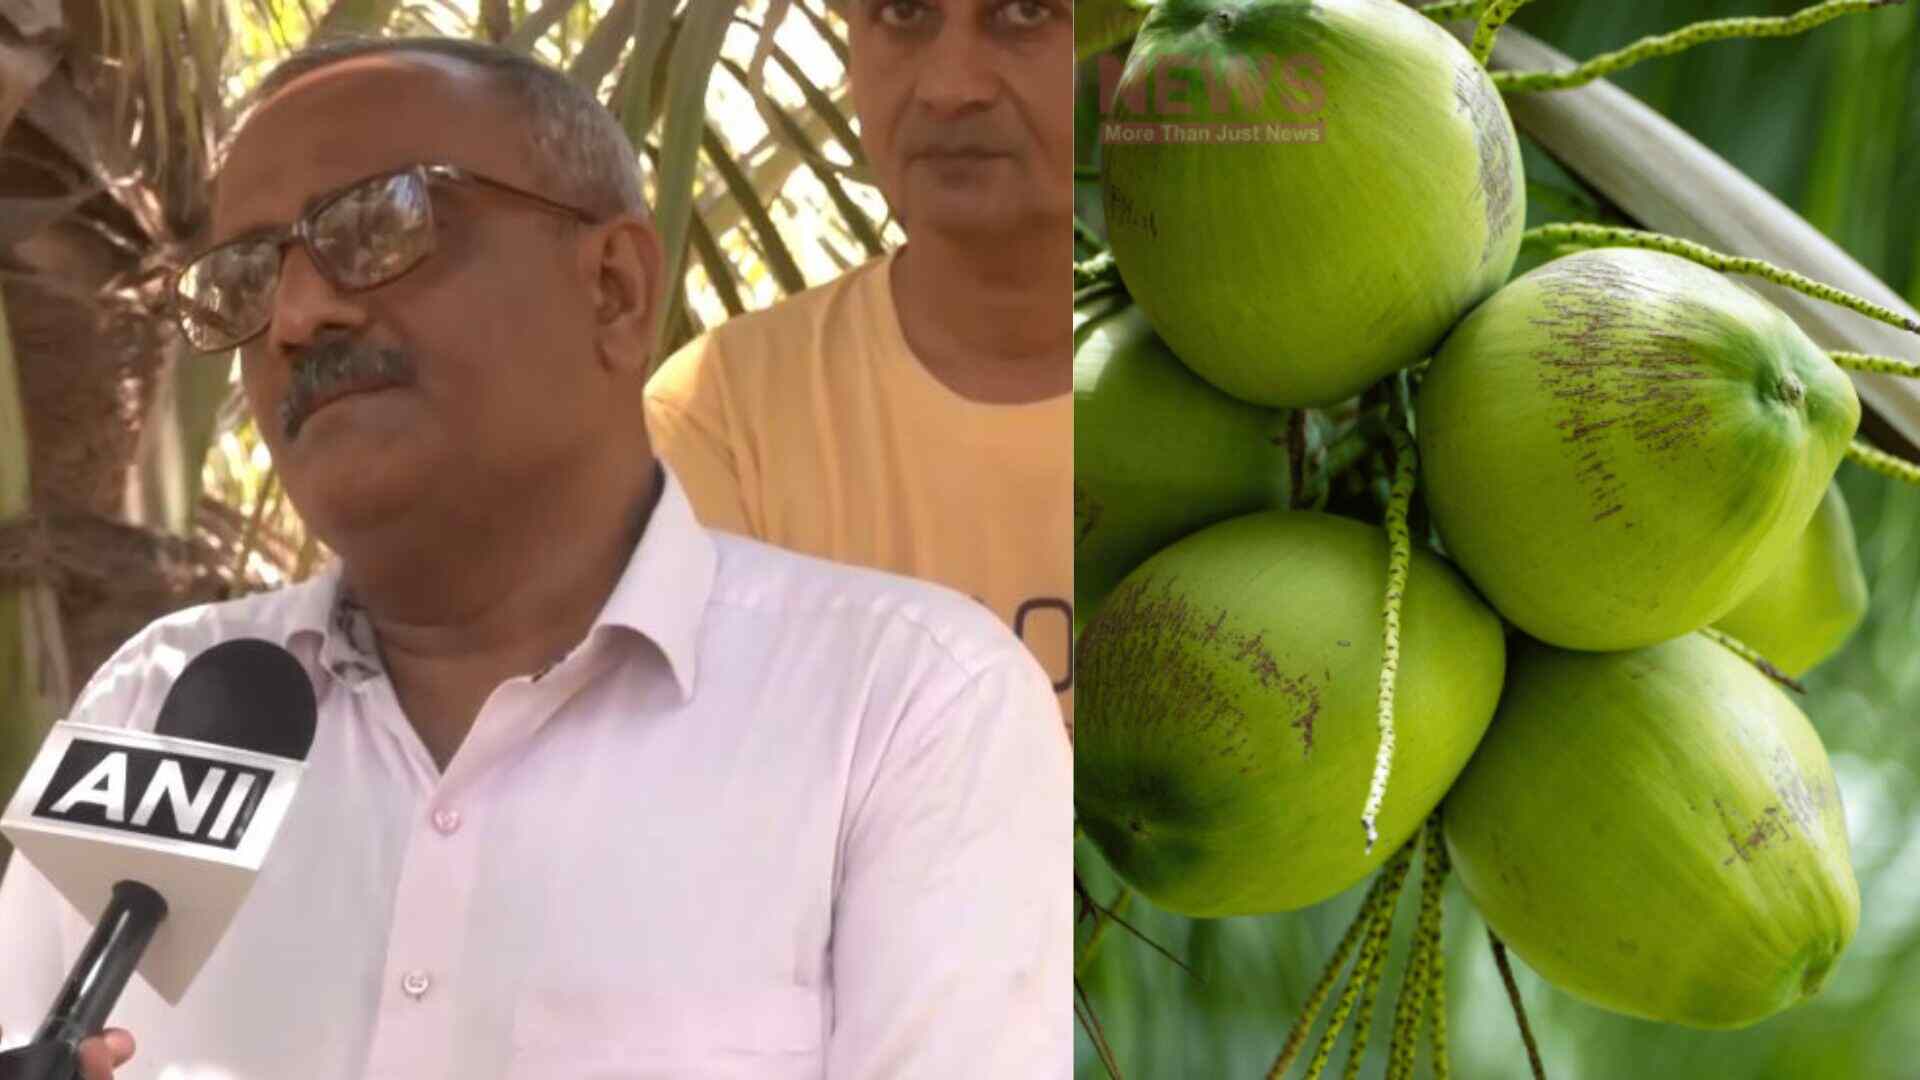 Gujarat Coconut Growers Seek Government Support After The Lok Sabha Elections To Expand Their Business